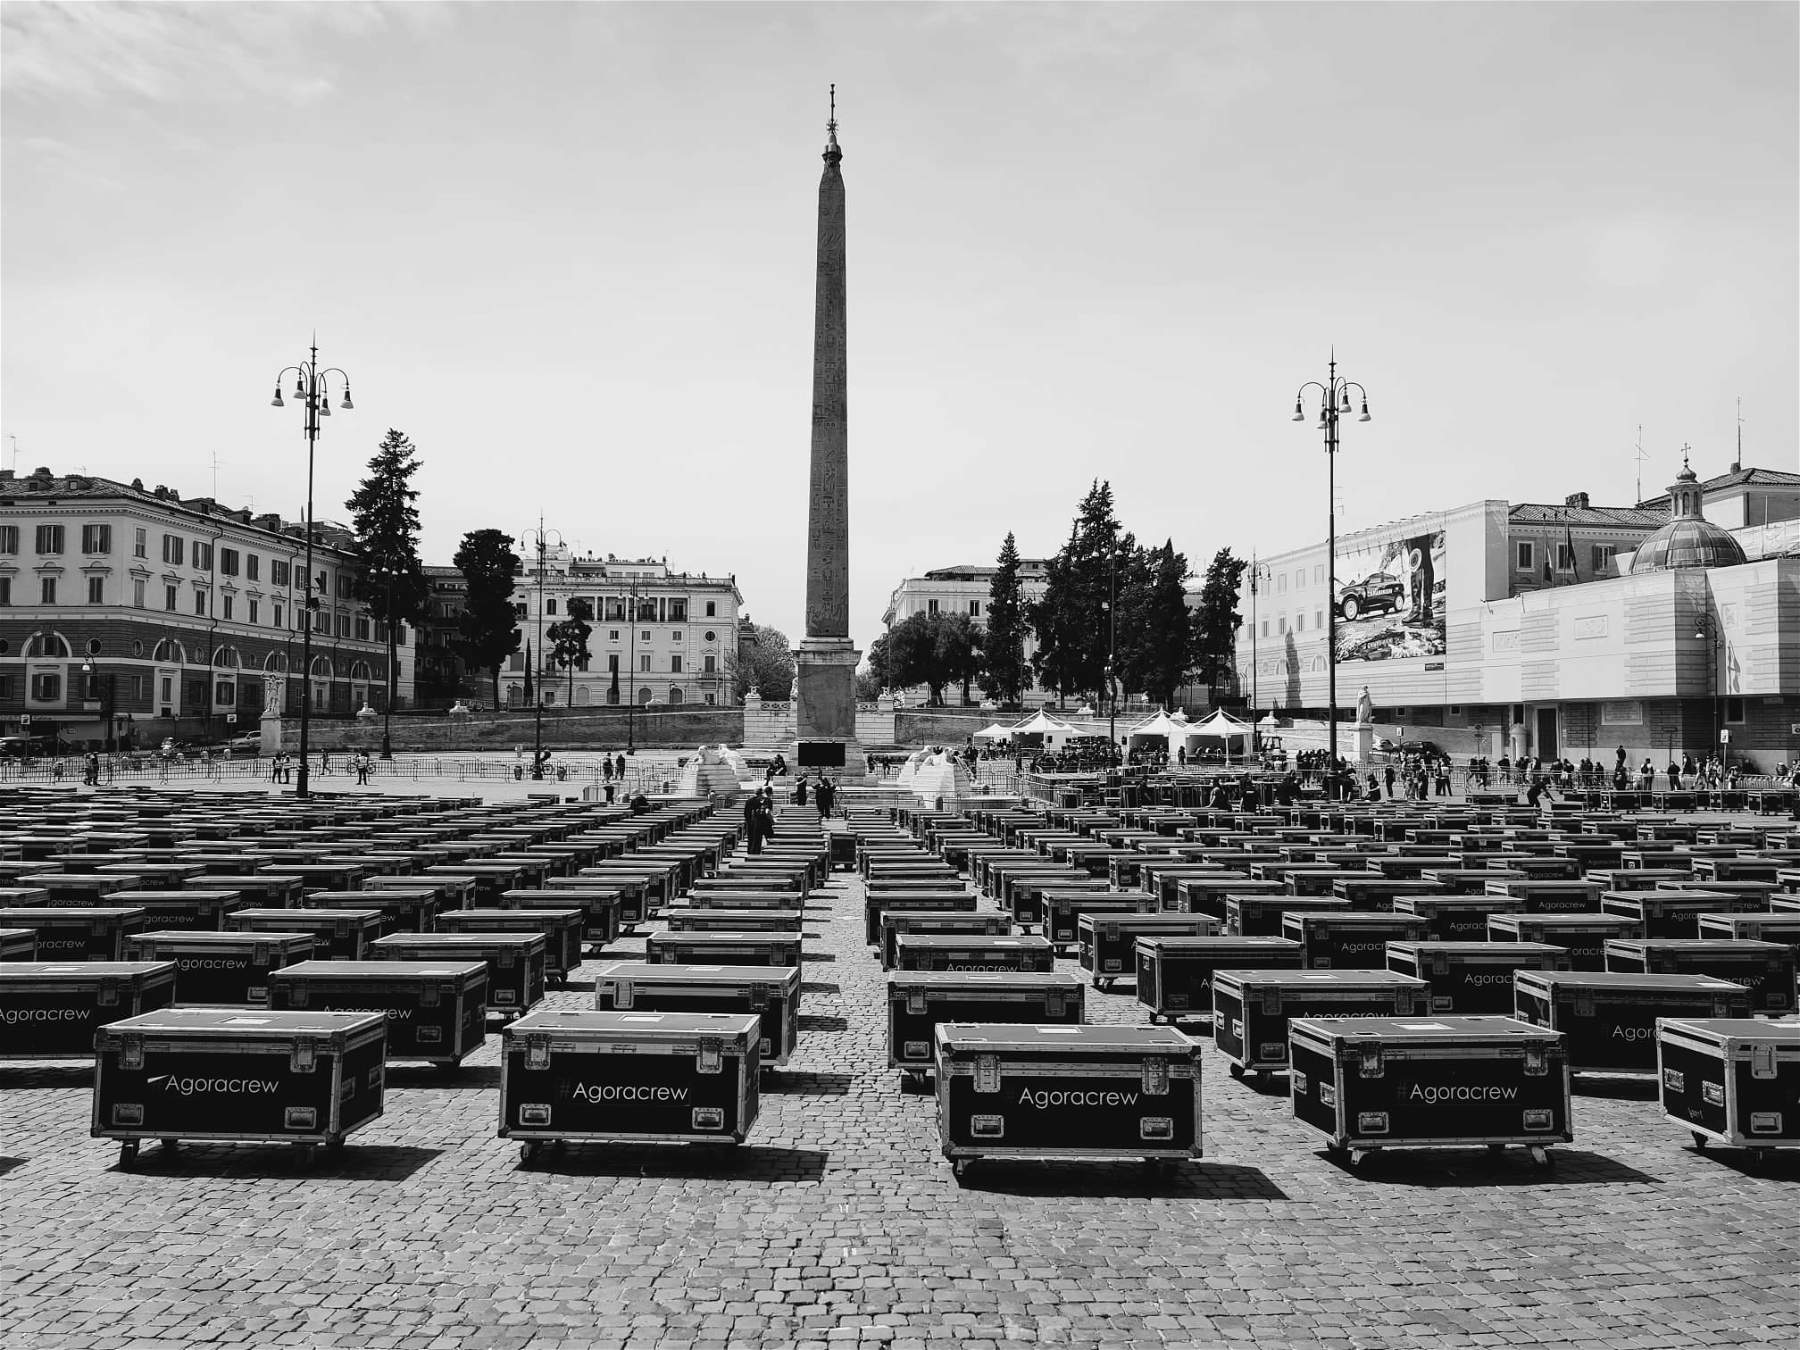 A thousand trunks in Rome's Piazza del Popolo: the demonstration today to support the show